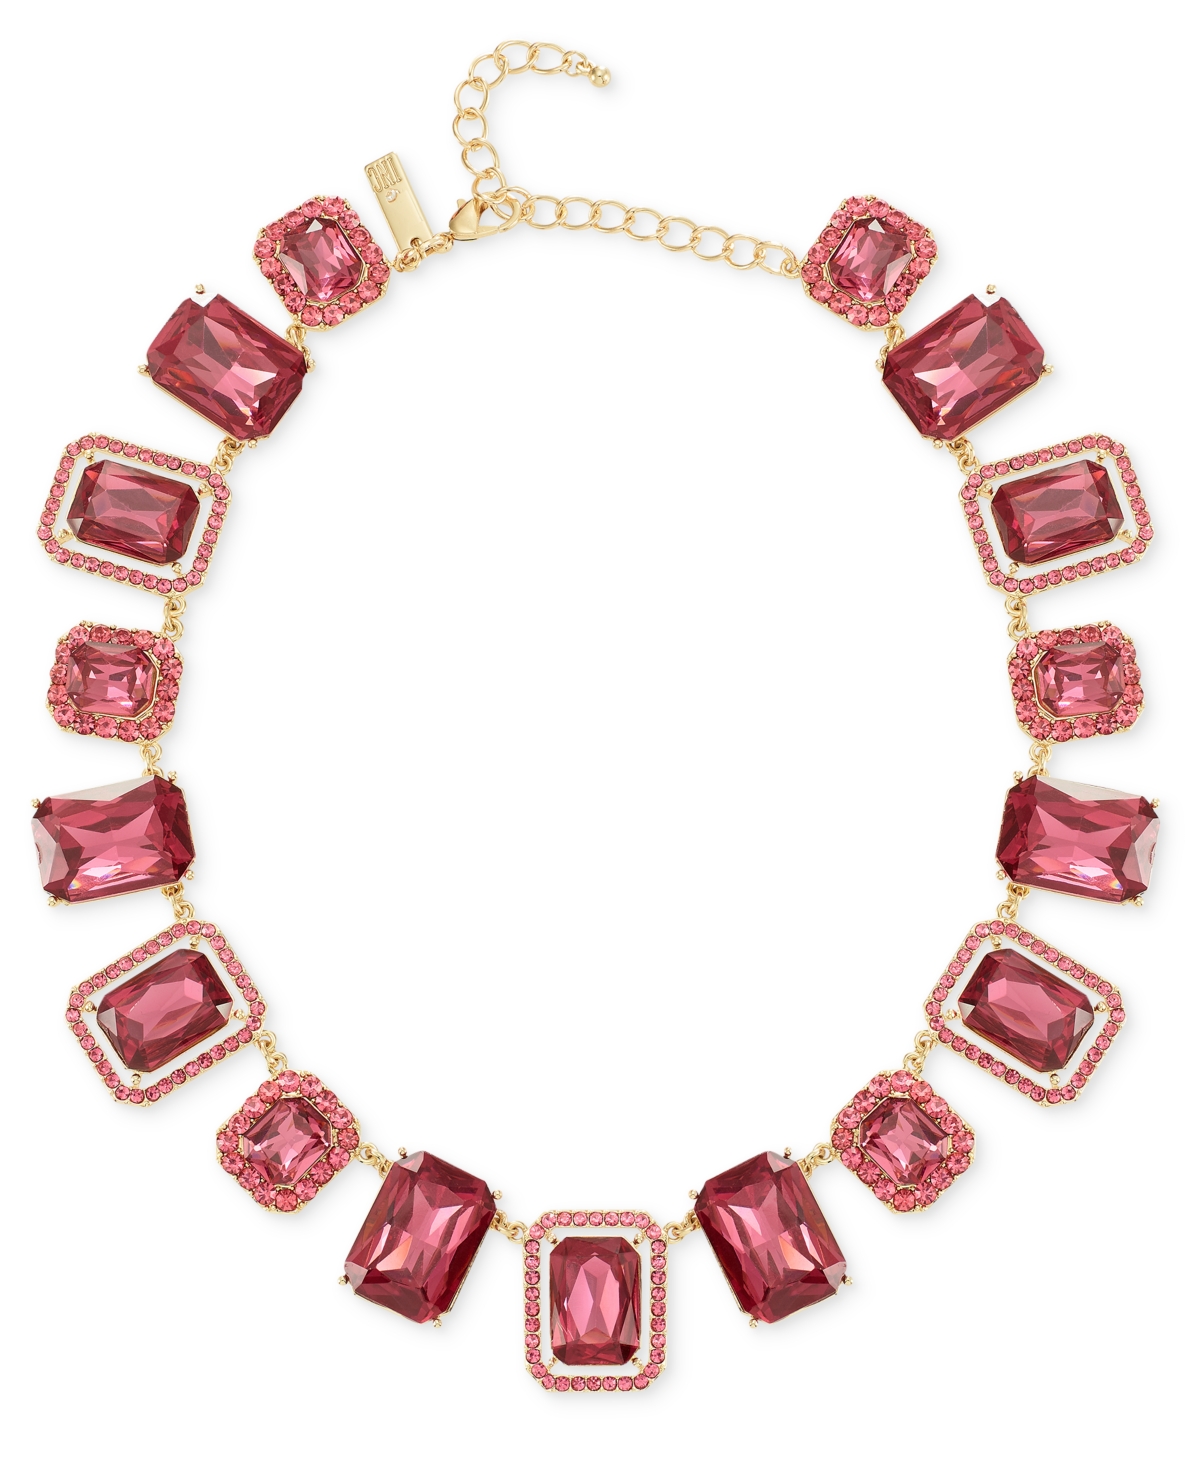 Gold-Tone Pink Stone All Around Necklace, 18" + 3" extender, Created for Macy's - Pink